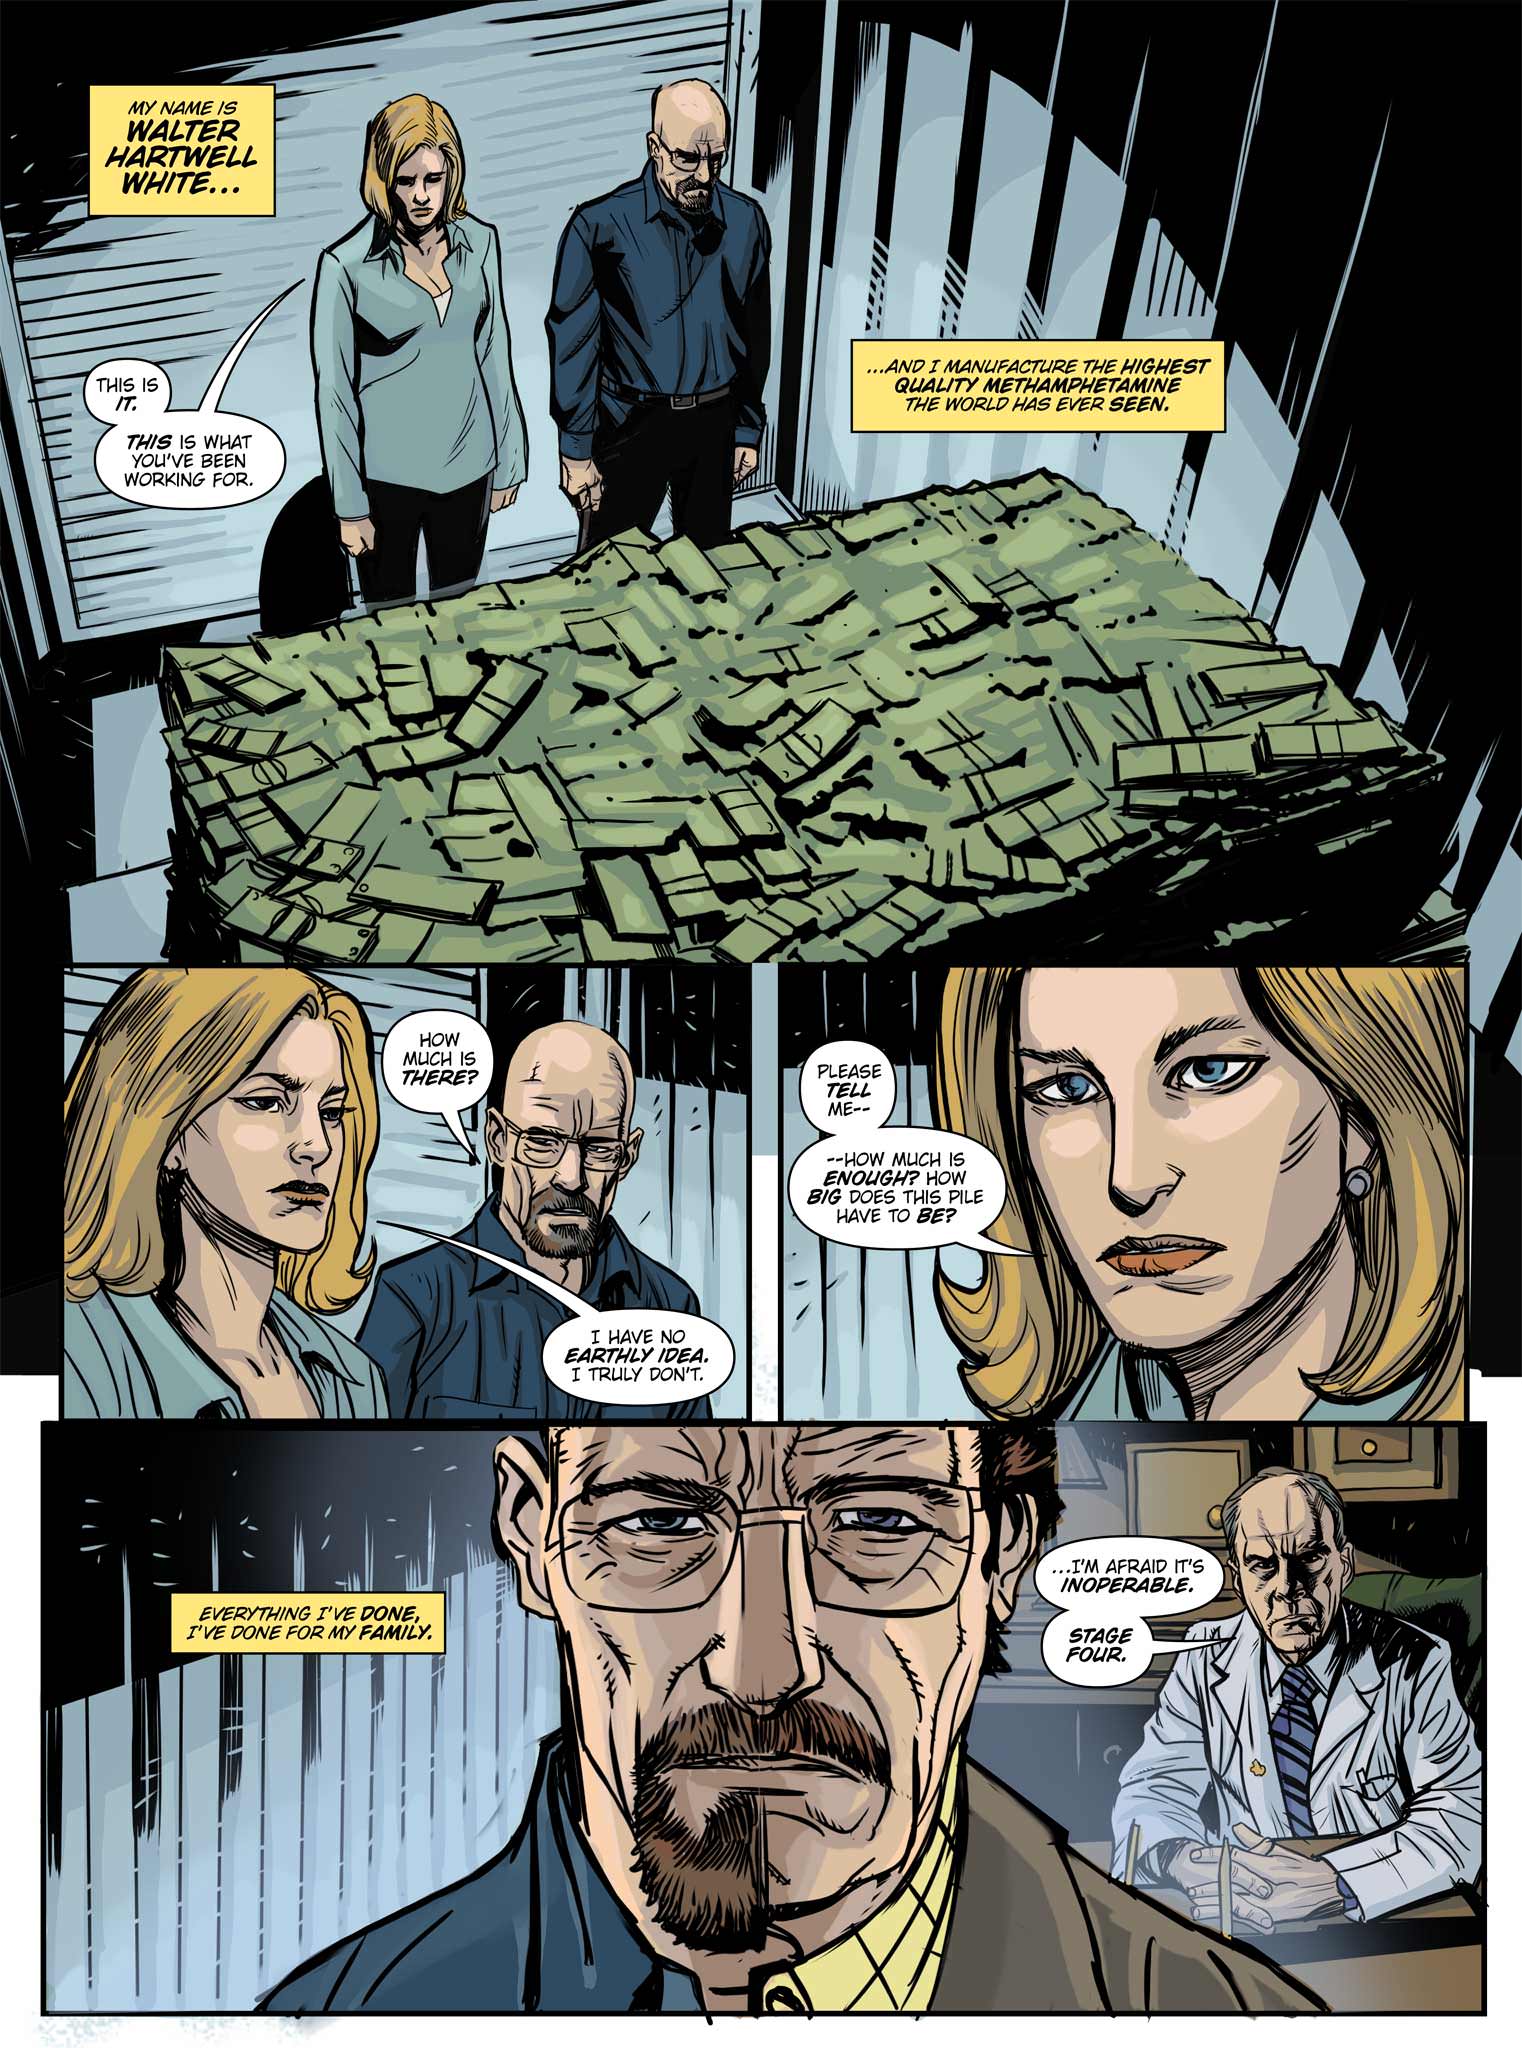 Read online Breaking Bad: All Bad Things comic -  Issue # Full - 2